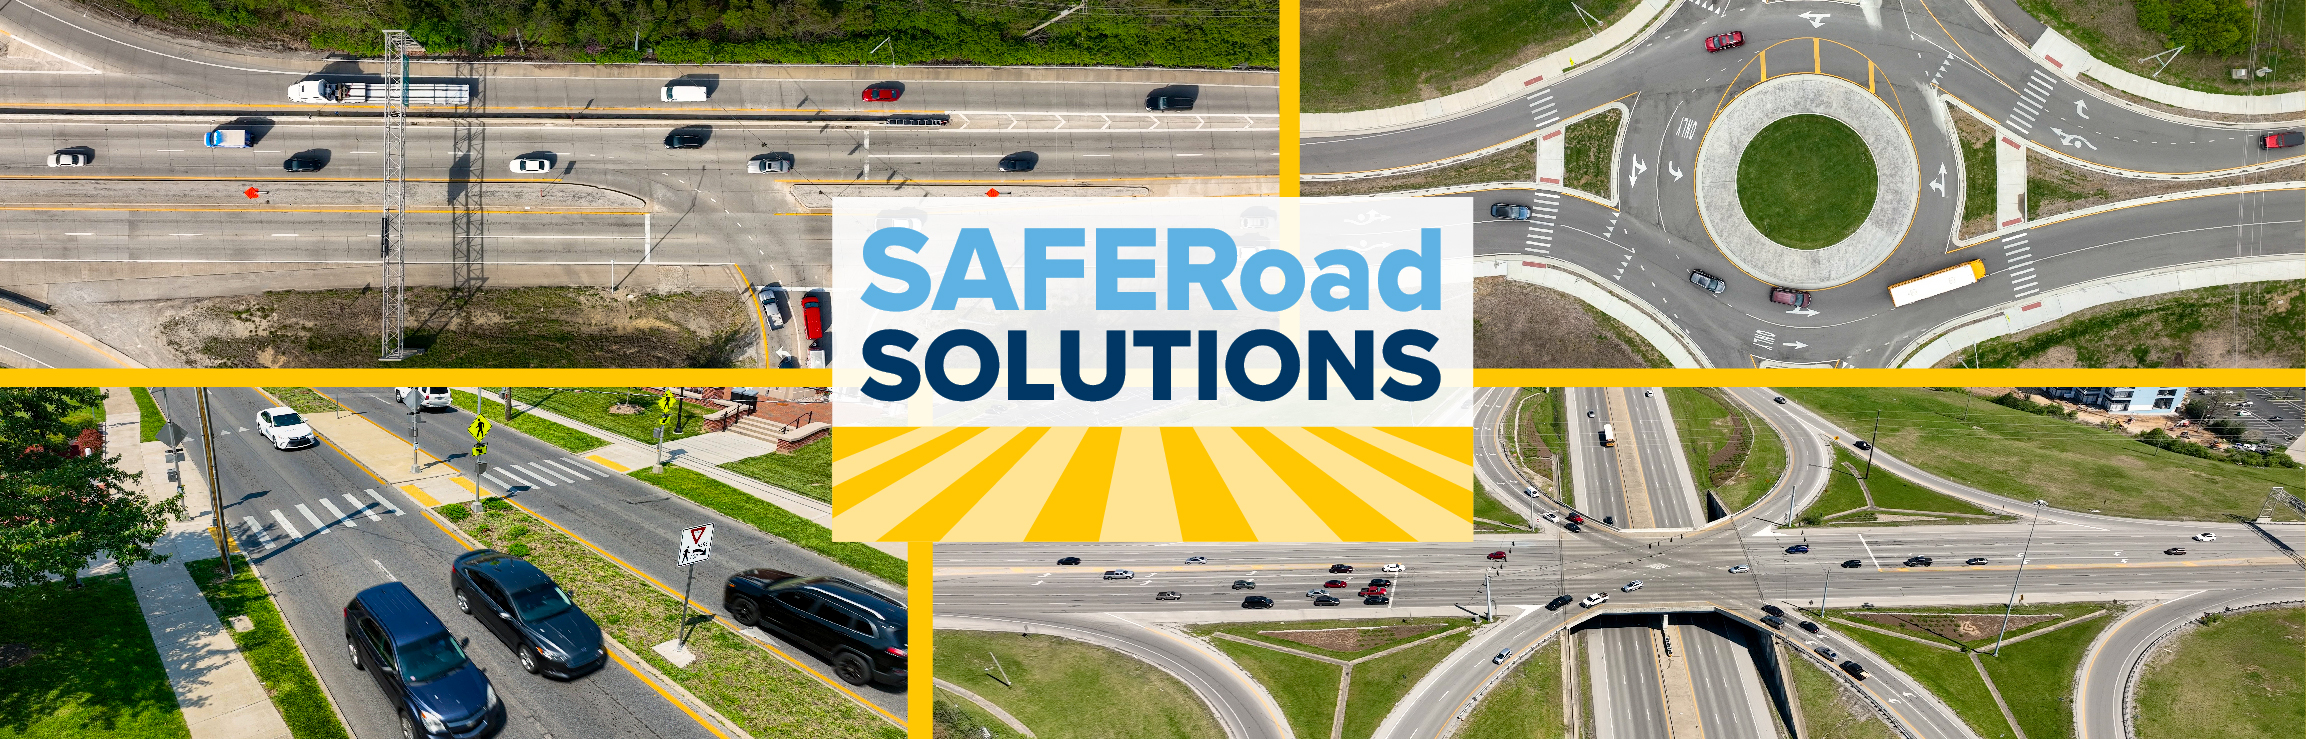 SafeRoad Solutions - Effective Road Designs Explained